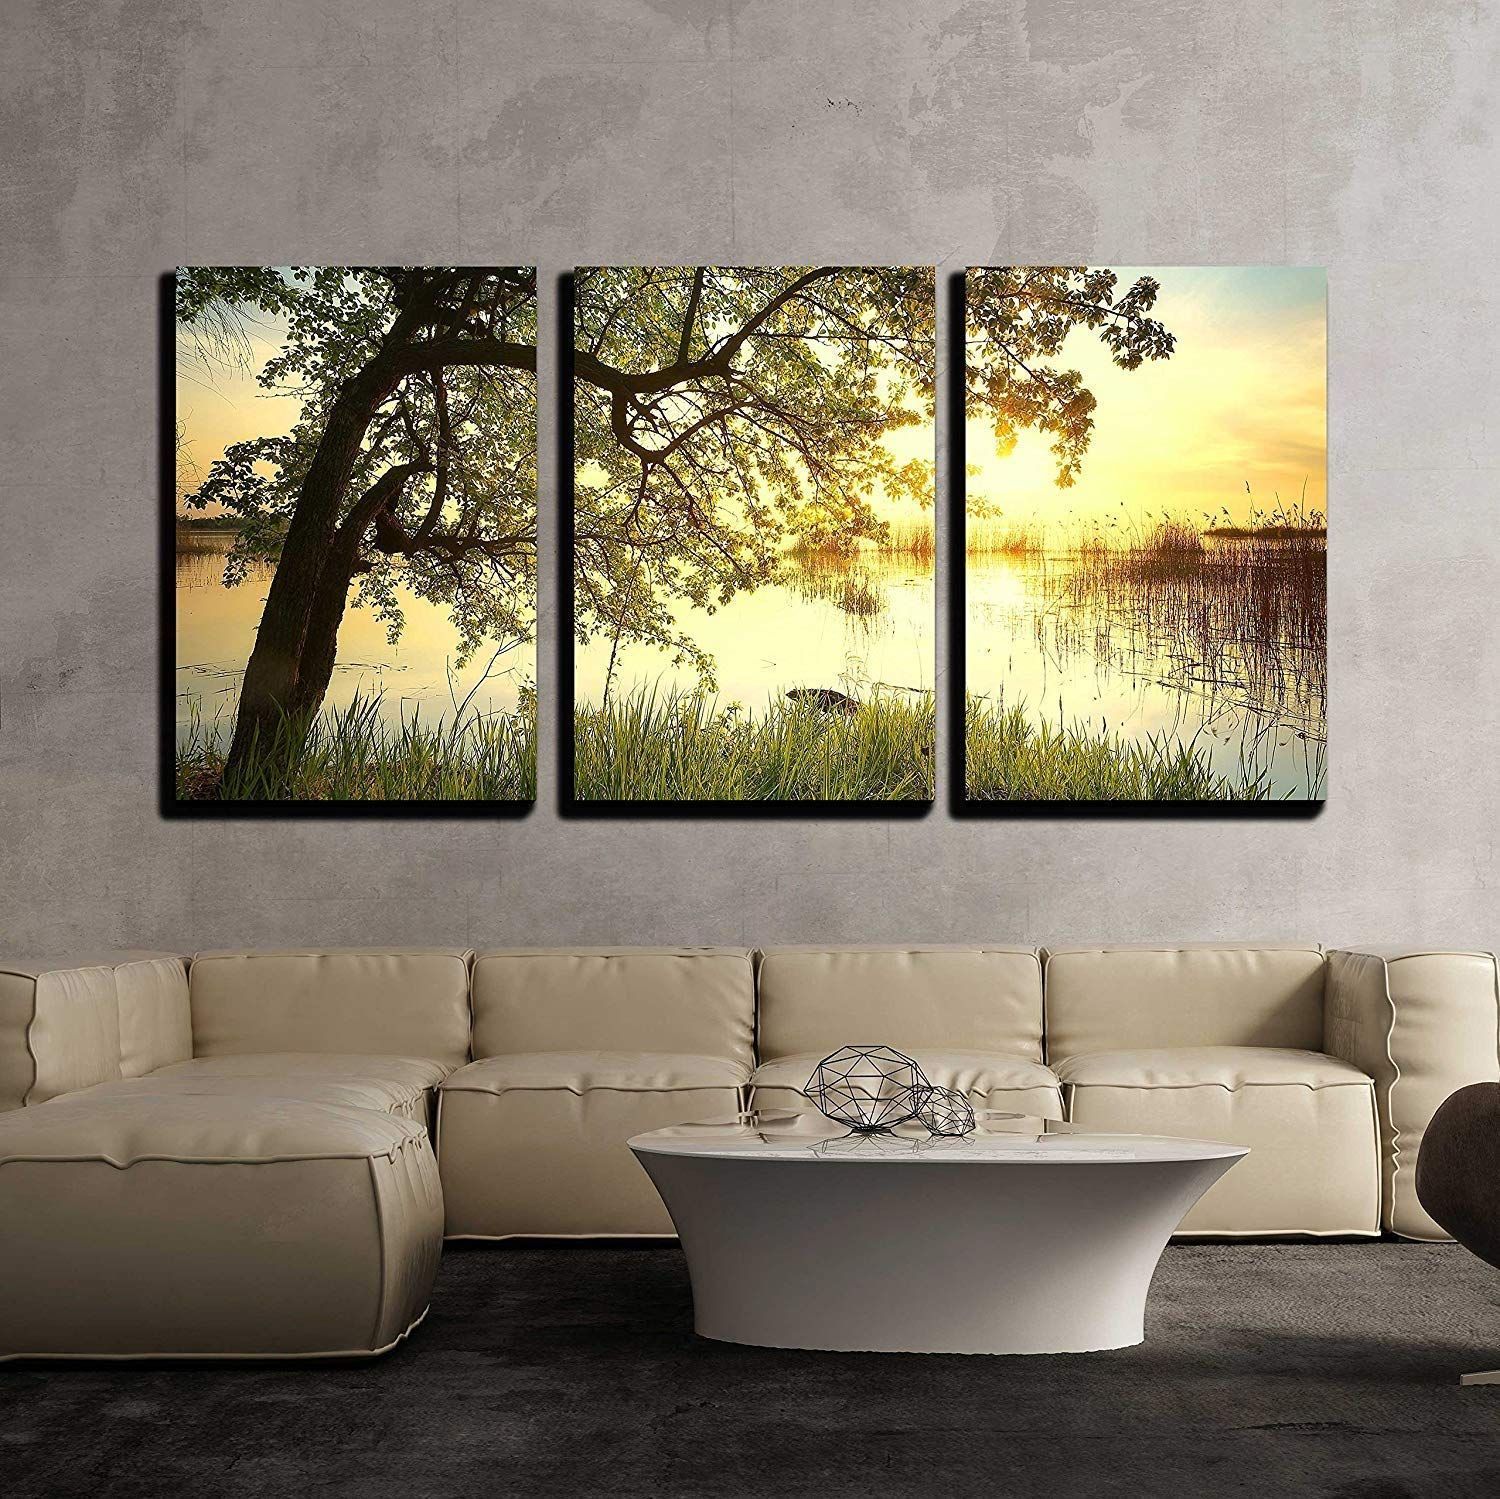 Wall26 – 3 Piece Canvas Wall Art – Tree Near Lake During For Most Popular Sunset Wall Art (View 8 of 20)